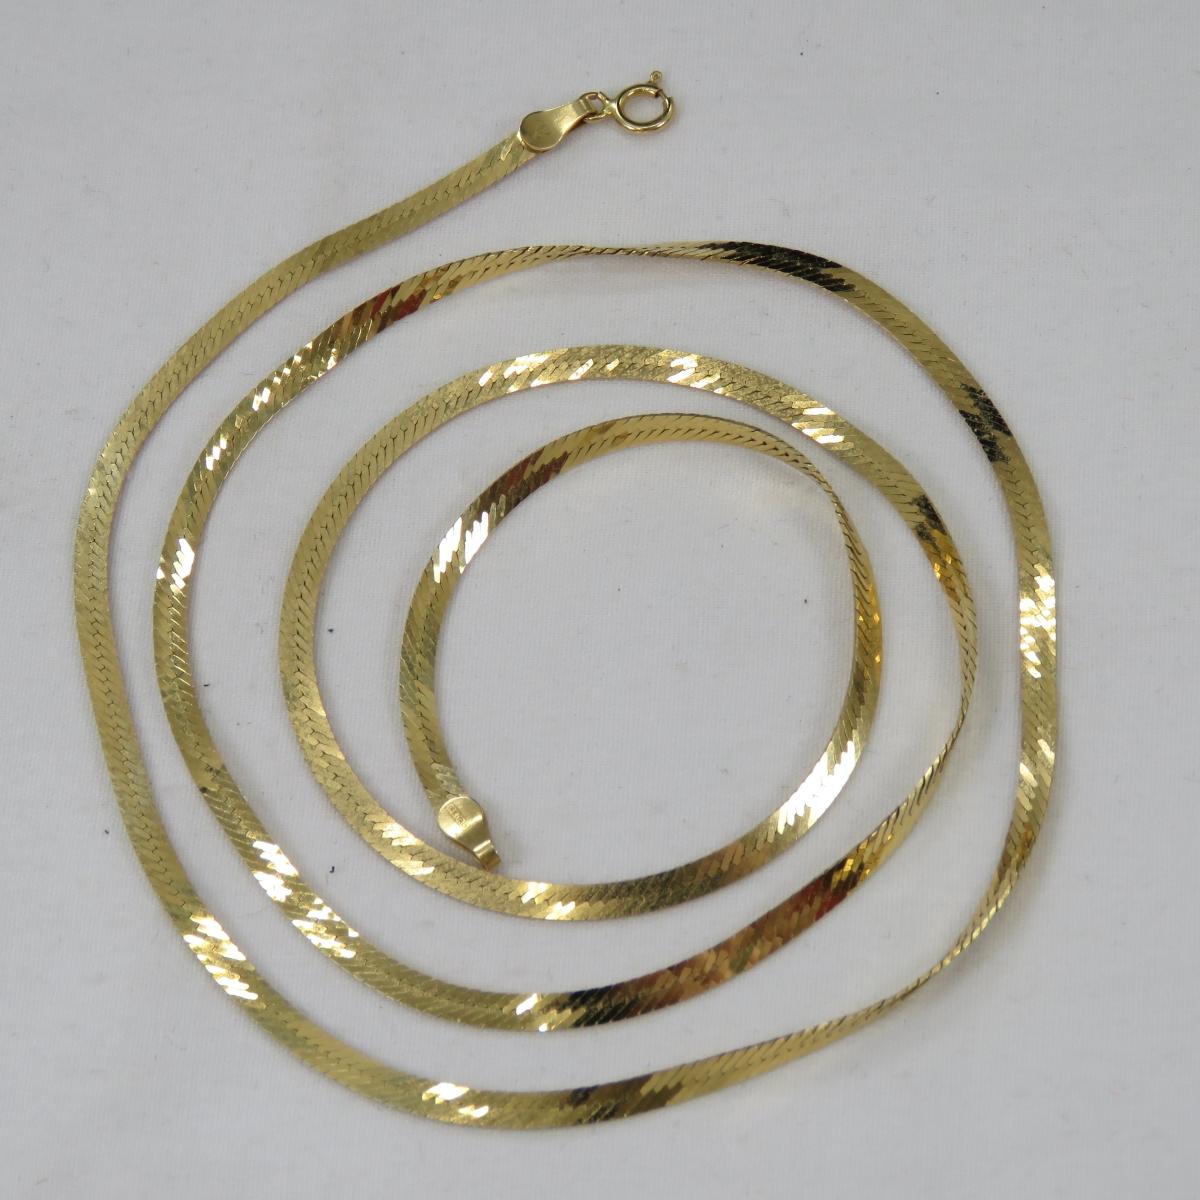 24" 14kt Gold Herringbone Necklace Made in Italy